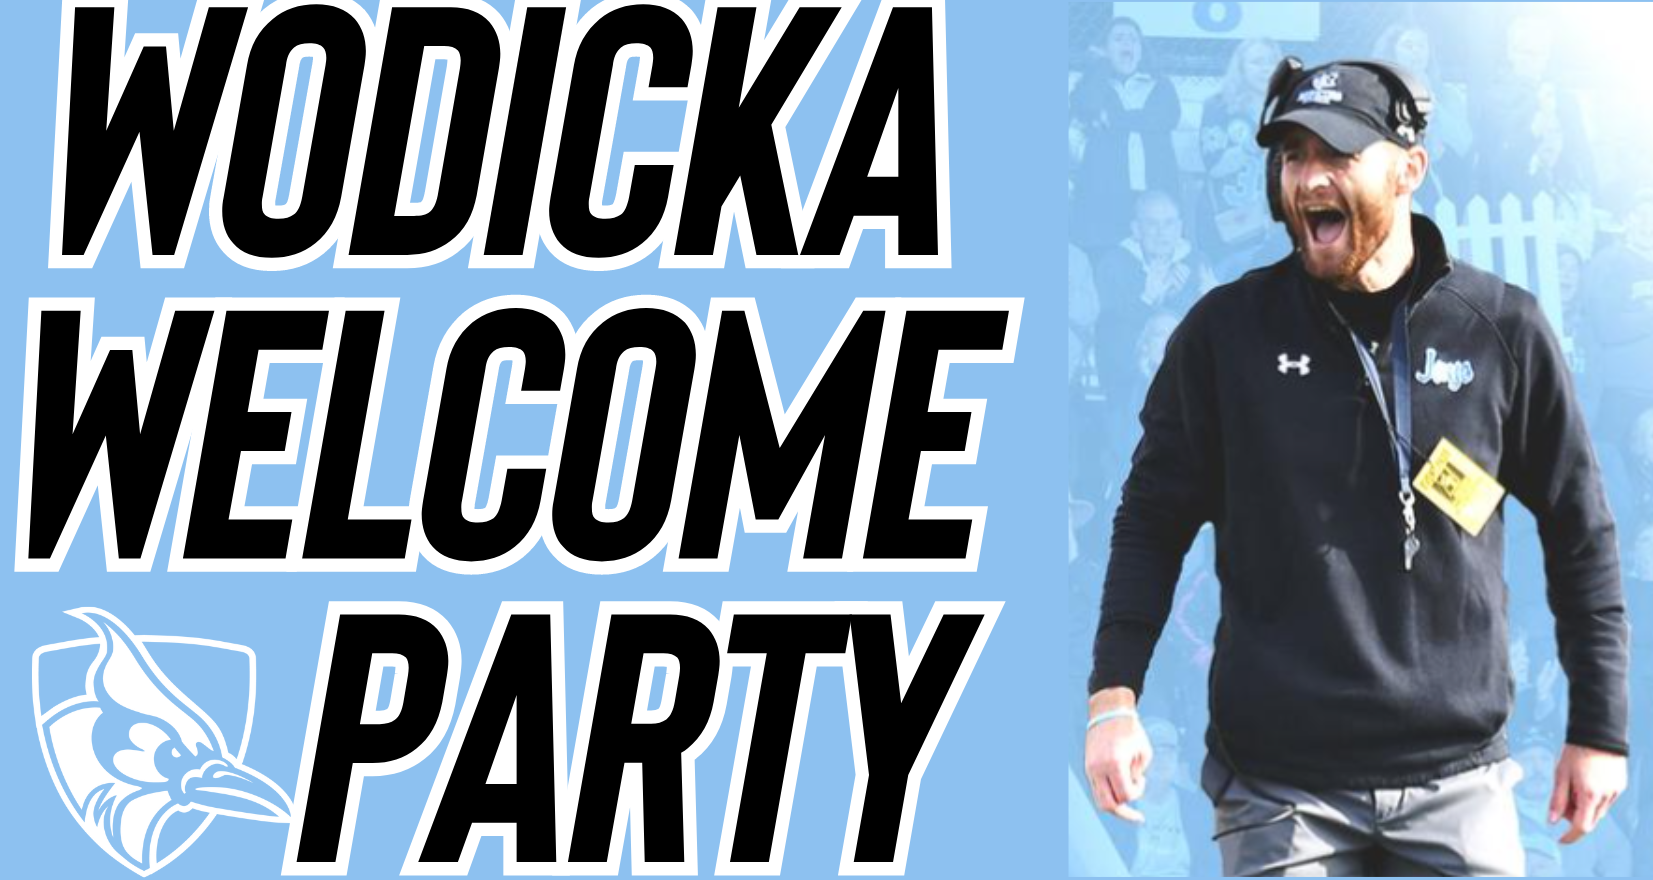 Wodicka Welcome Graphic